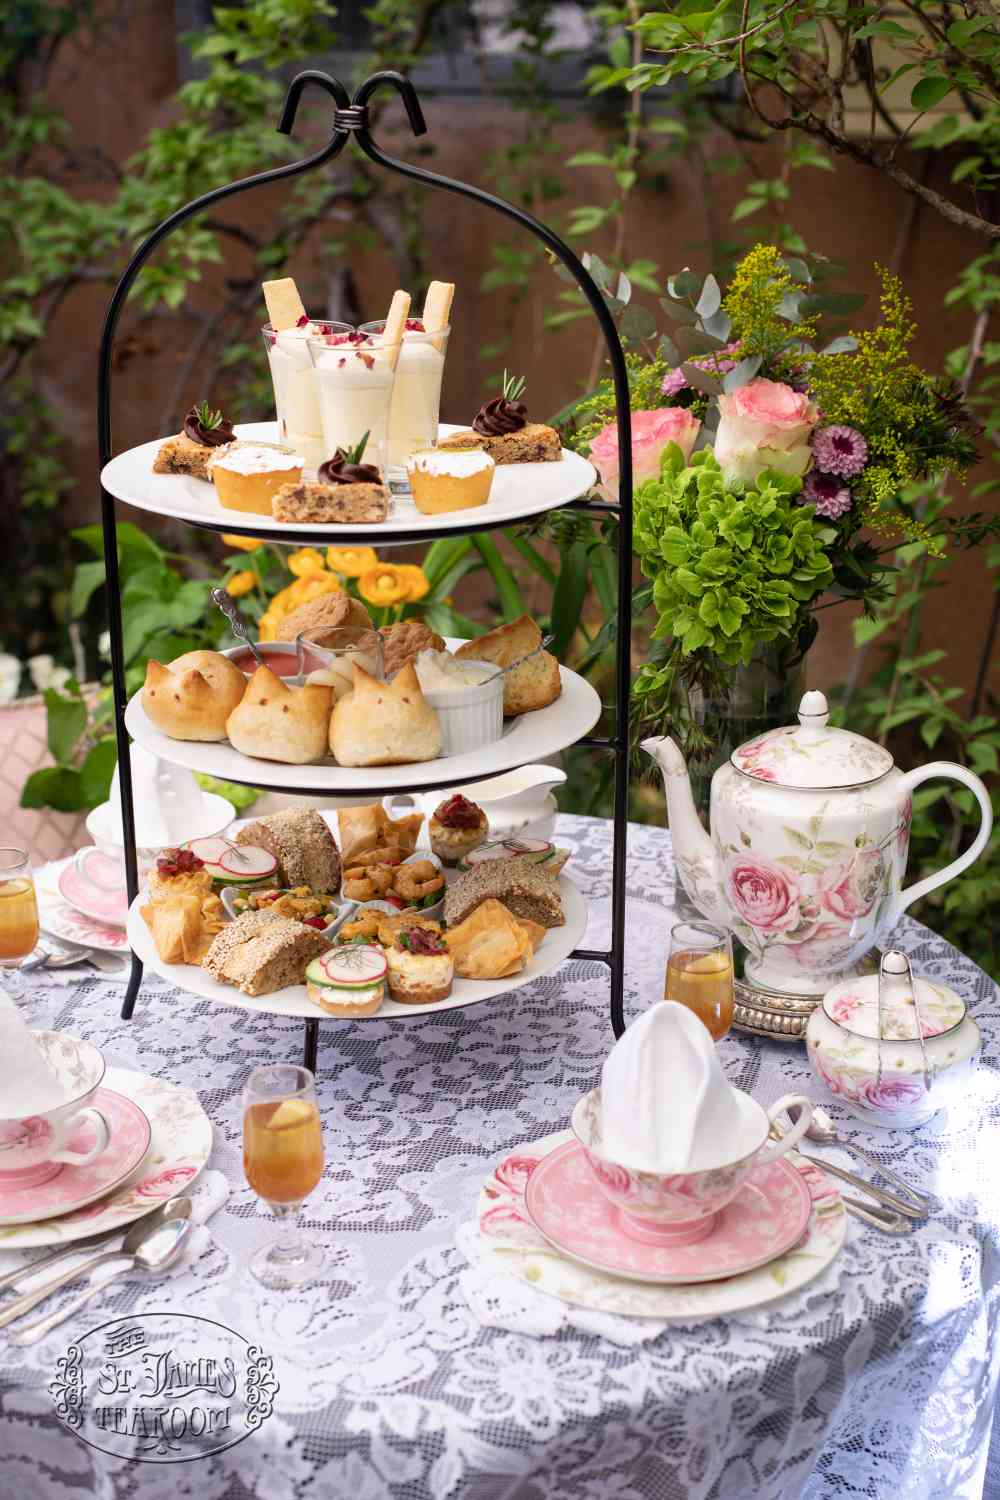 Afternoon Tea Menu - Royal Garden Party - Dine in Tray for 3